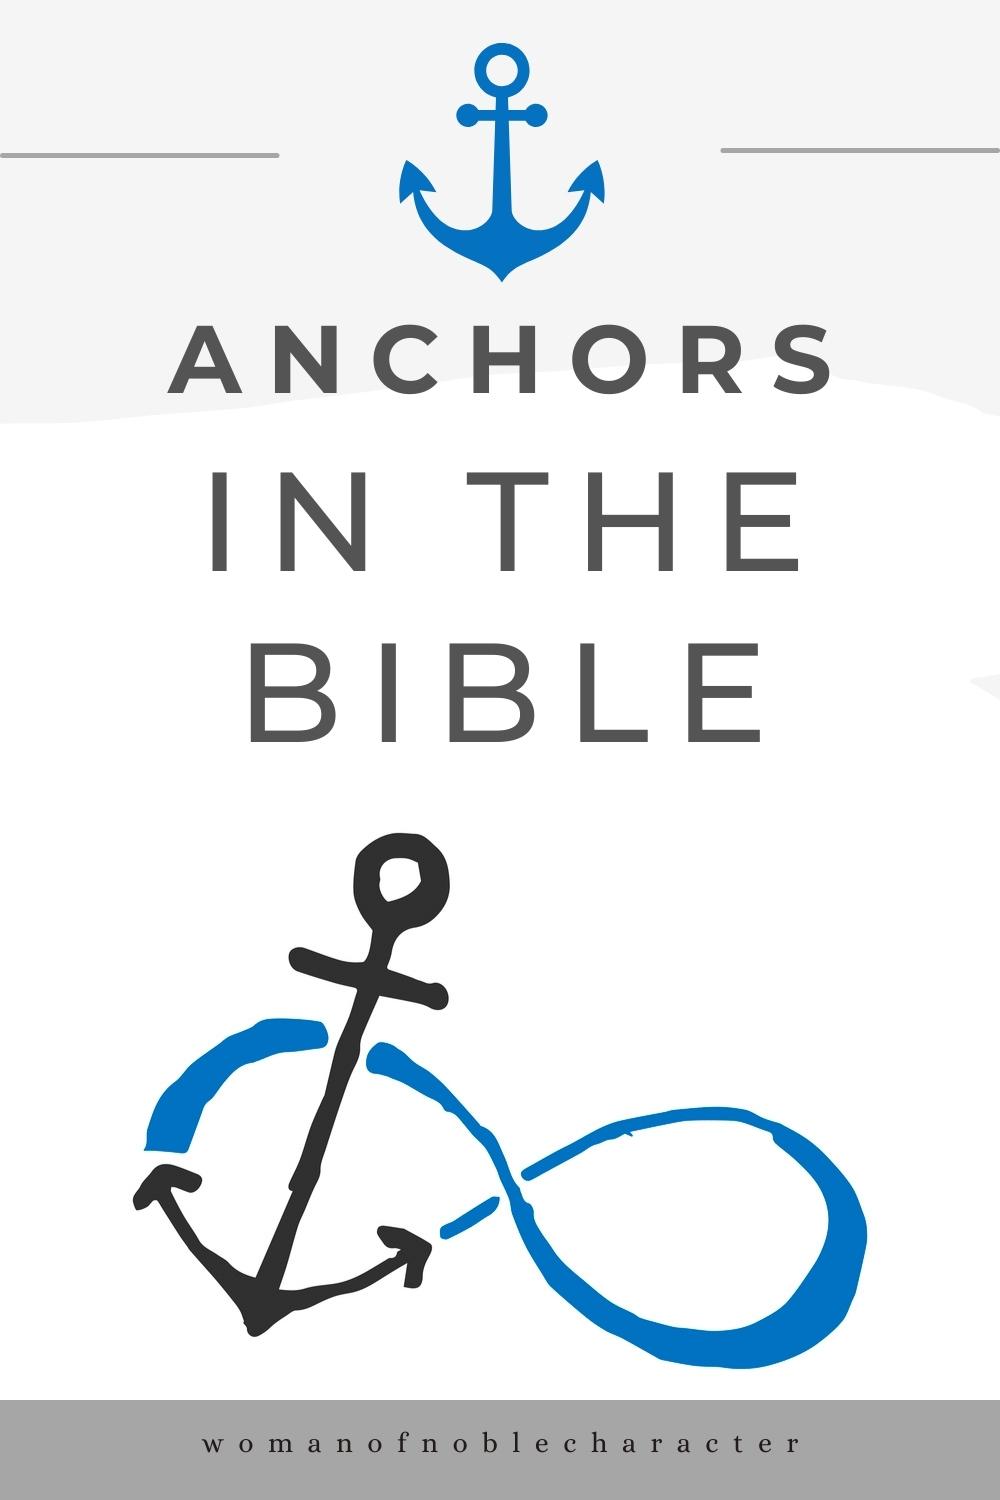 image of anchor intertwined with infinity symbols with the text anchors in the Bible